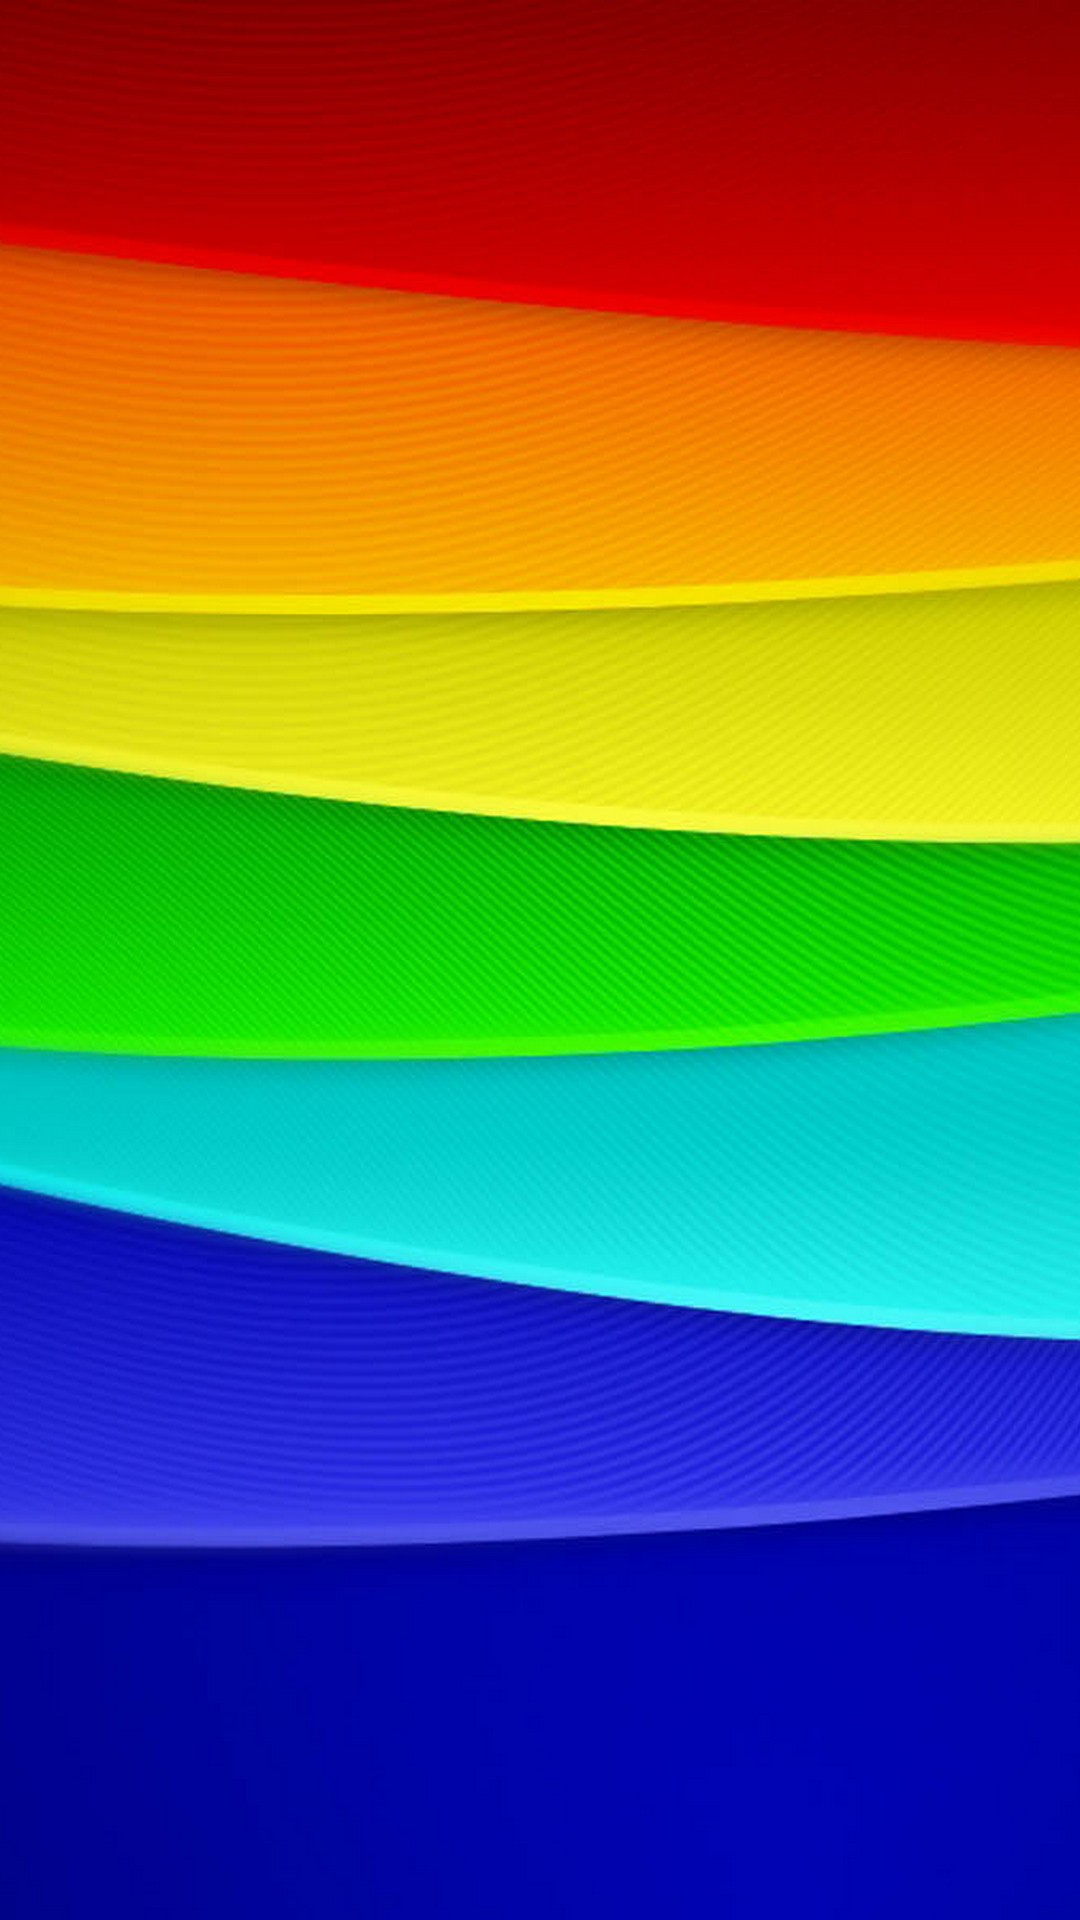 Rainbow Wallpaper iPhone with image resolution 1080x1920 pixel. You can make this wallpaper for your iPhone 5, 6, 7, 8, X backgrounds, Mobile Screensaver, or iPad Lock Screen